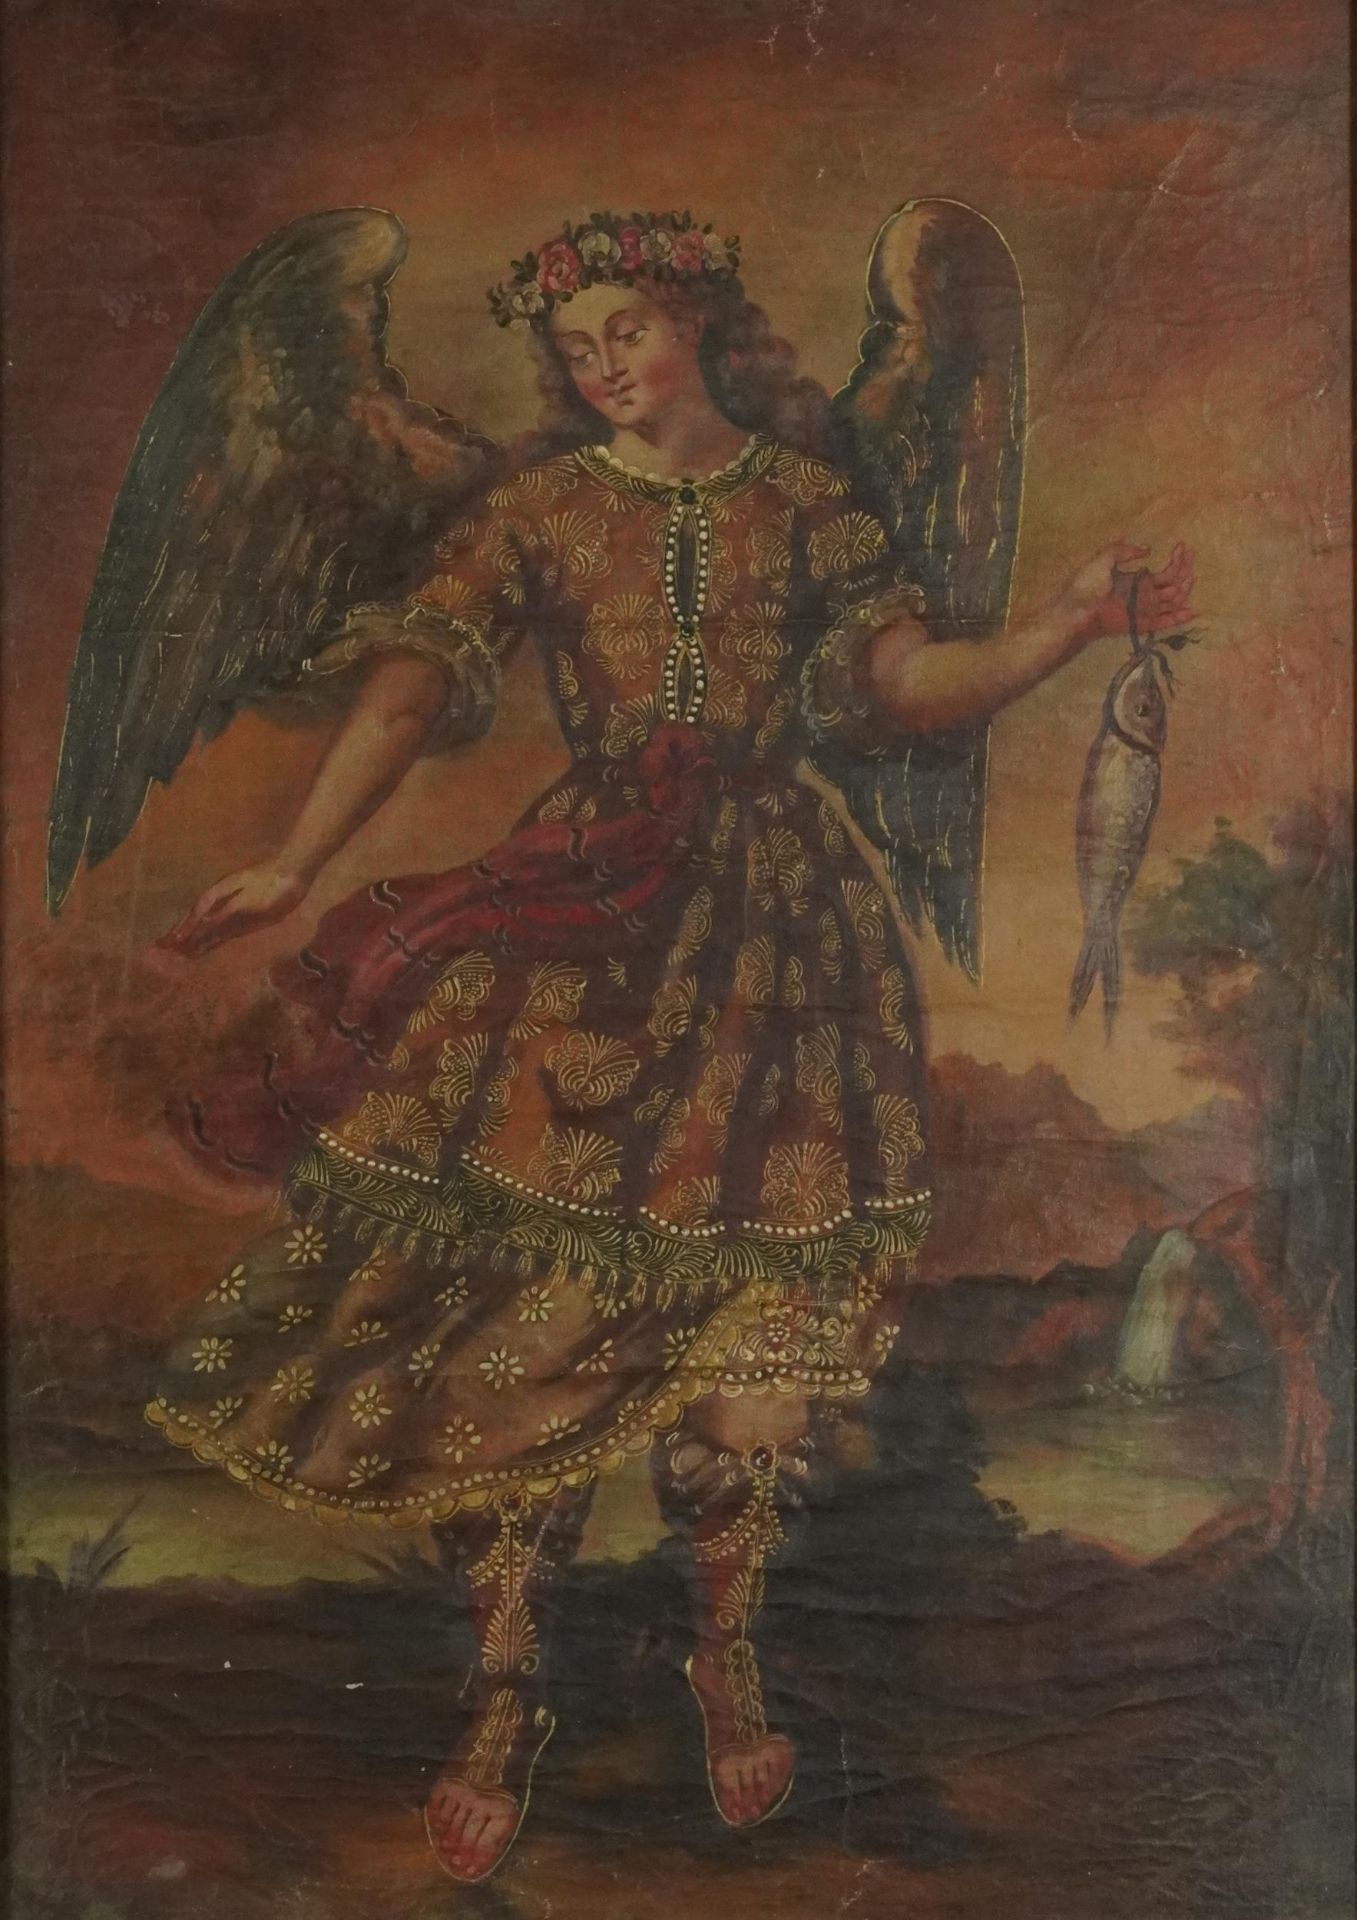 St Michael The Archangel, antique Cuzco School oil on canvas, framed and glazed, 66.5cm x 47.5cm,